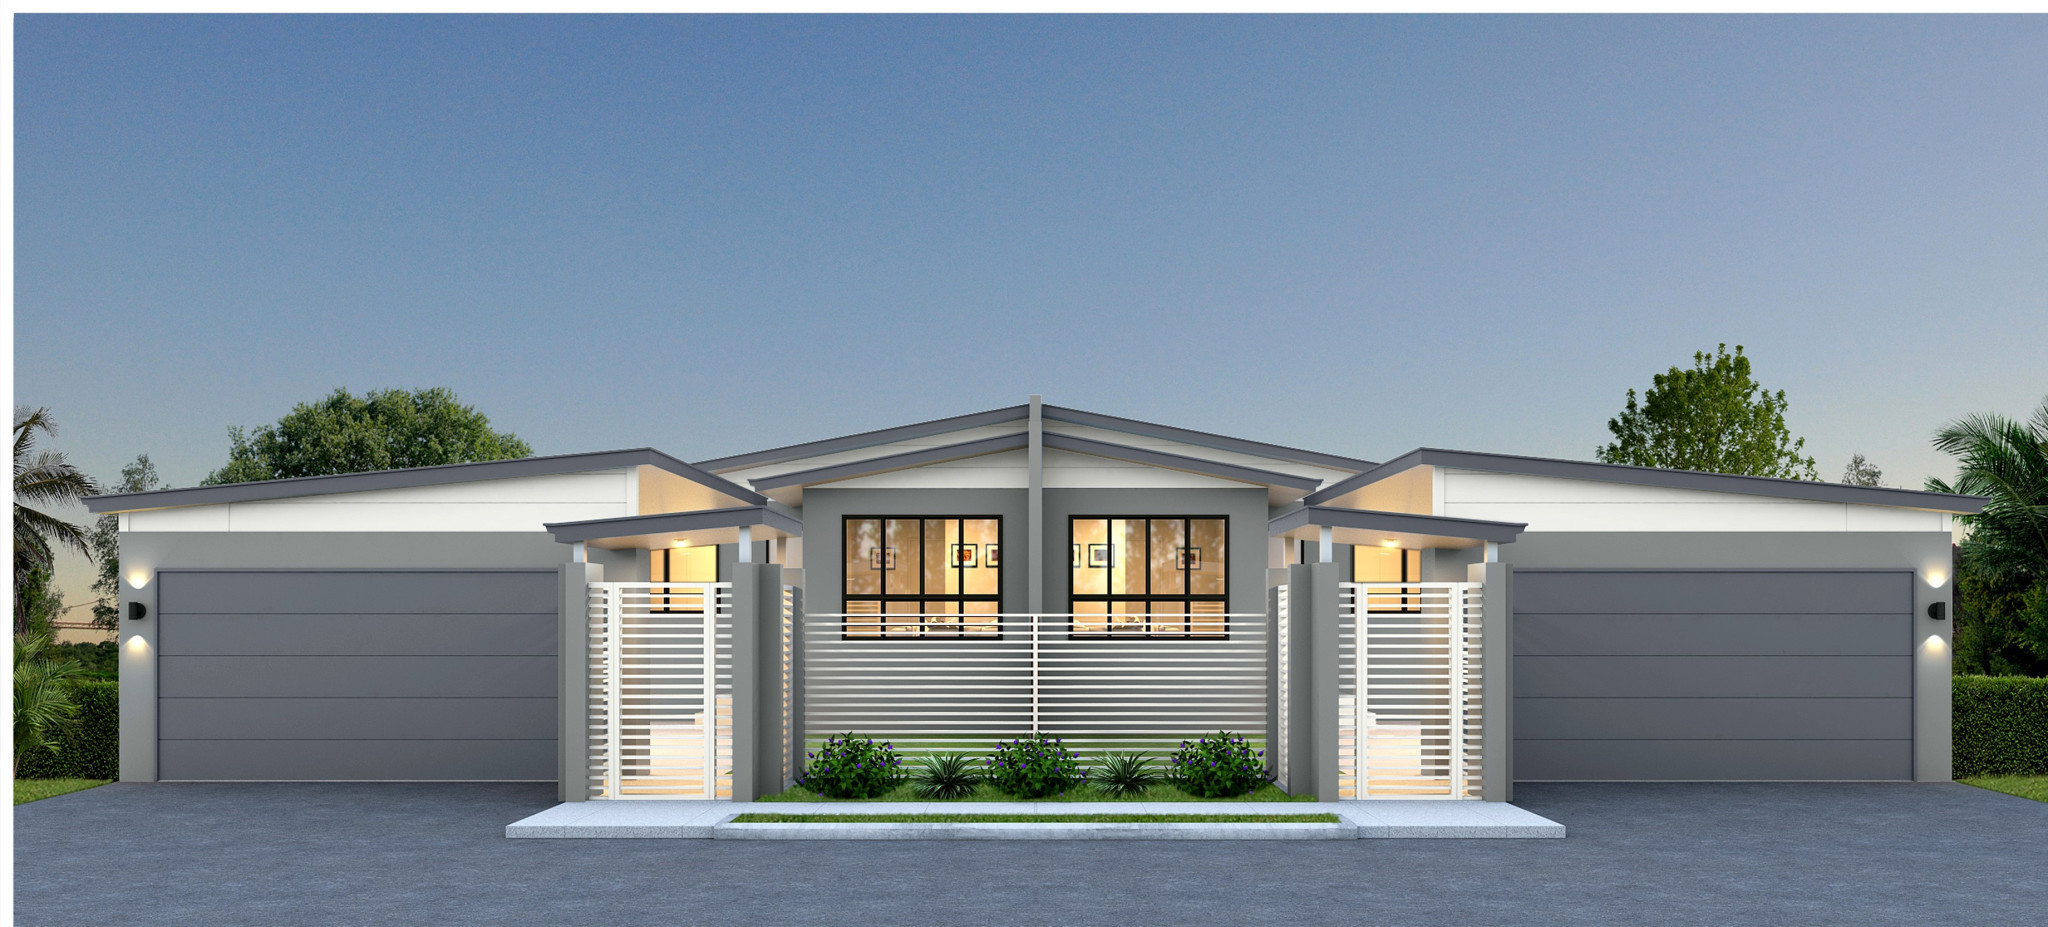 An artist’s impression of the villas developer Tom Hedley is considering for McLachlan St, Manunda. Picture: Supplied